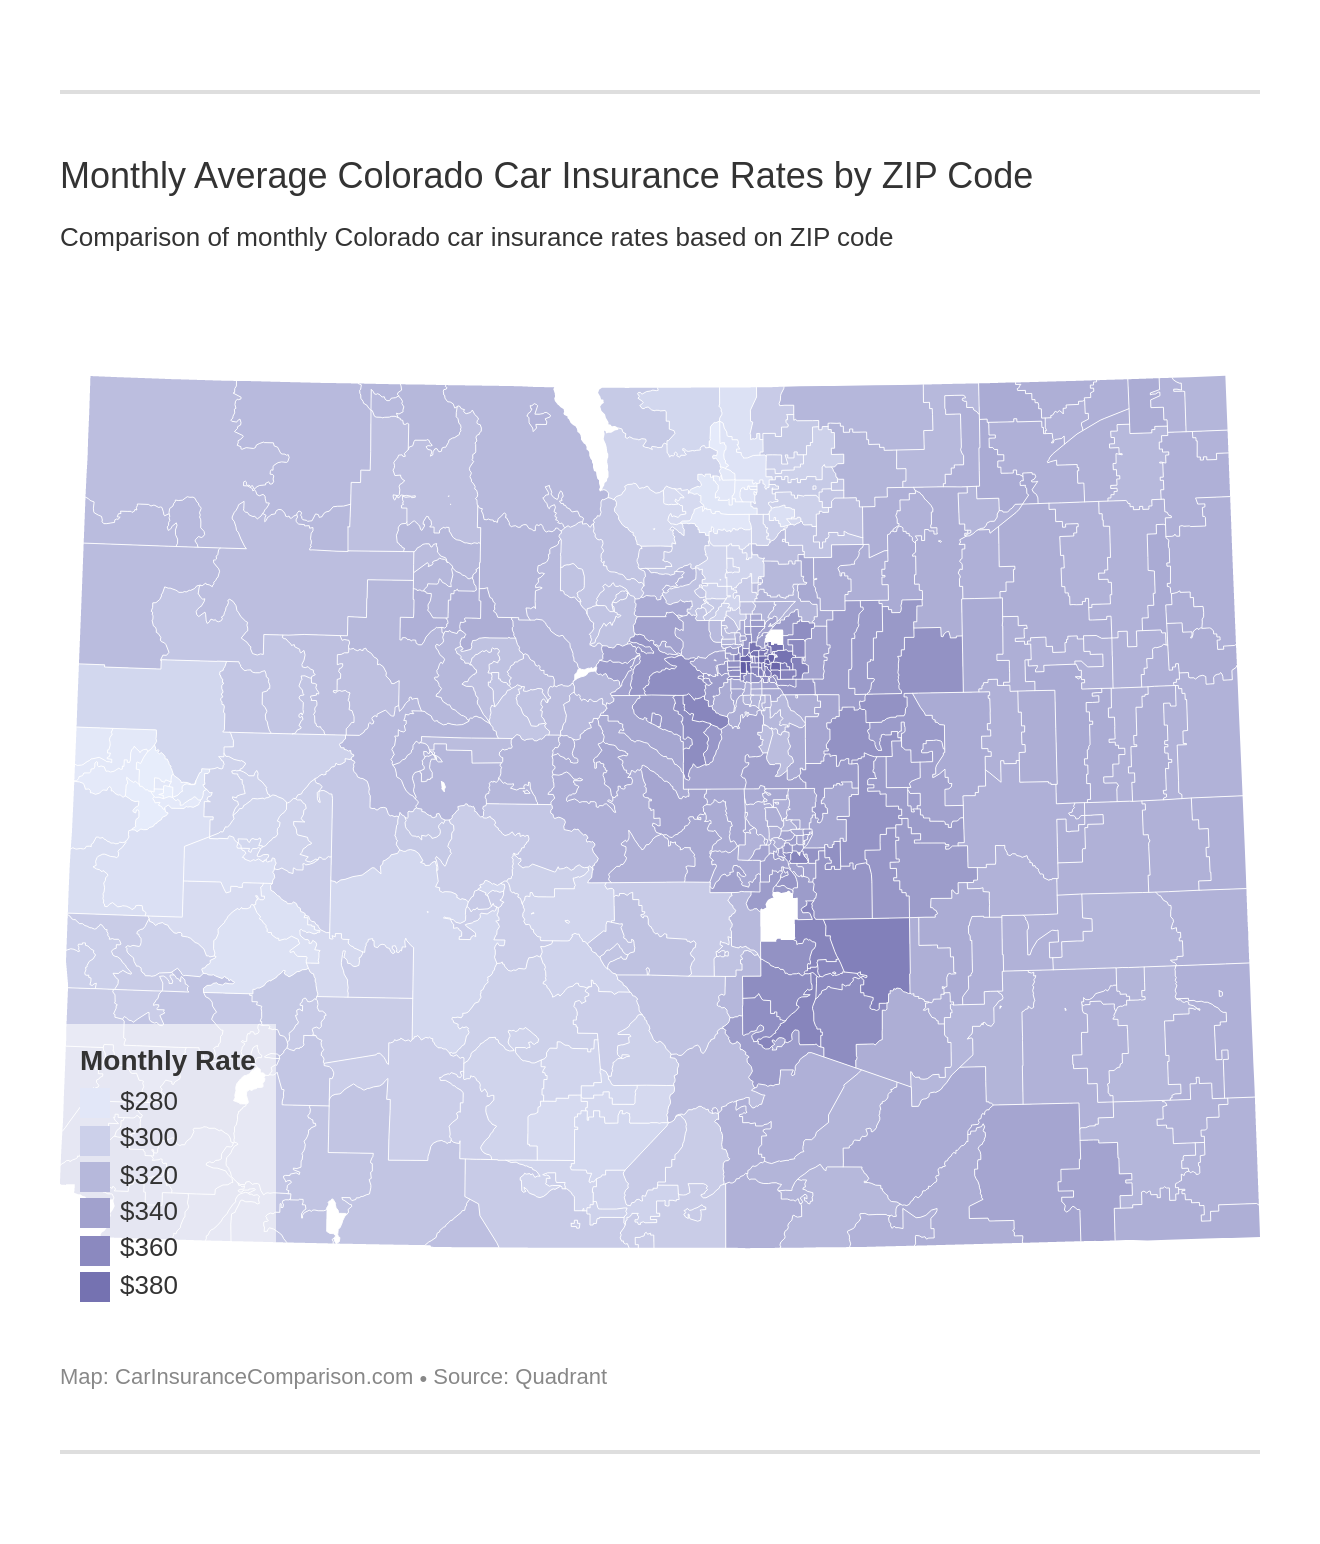 Monthly Average Colorado Car Insurance Rates by ZIP Code